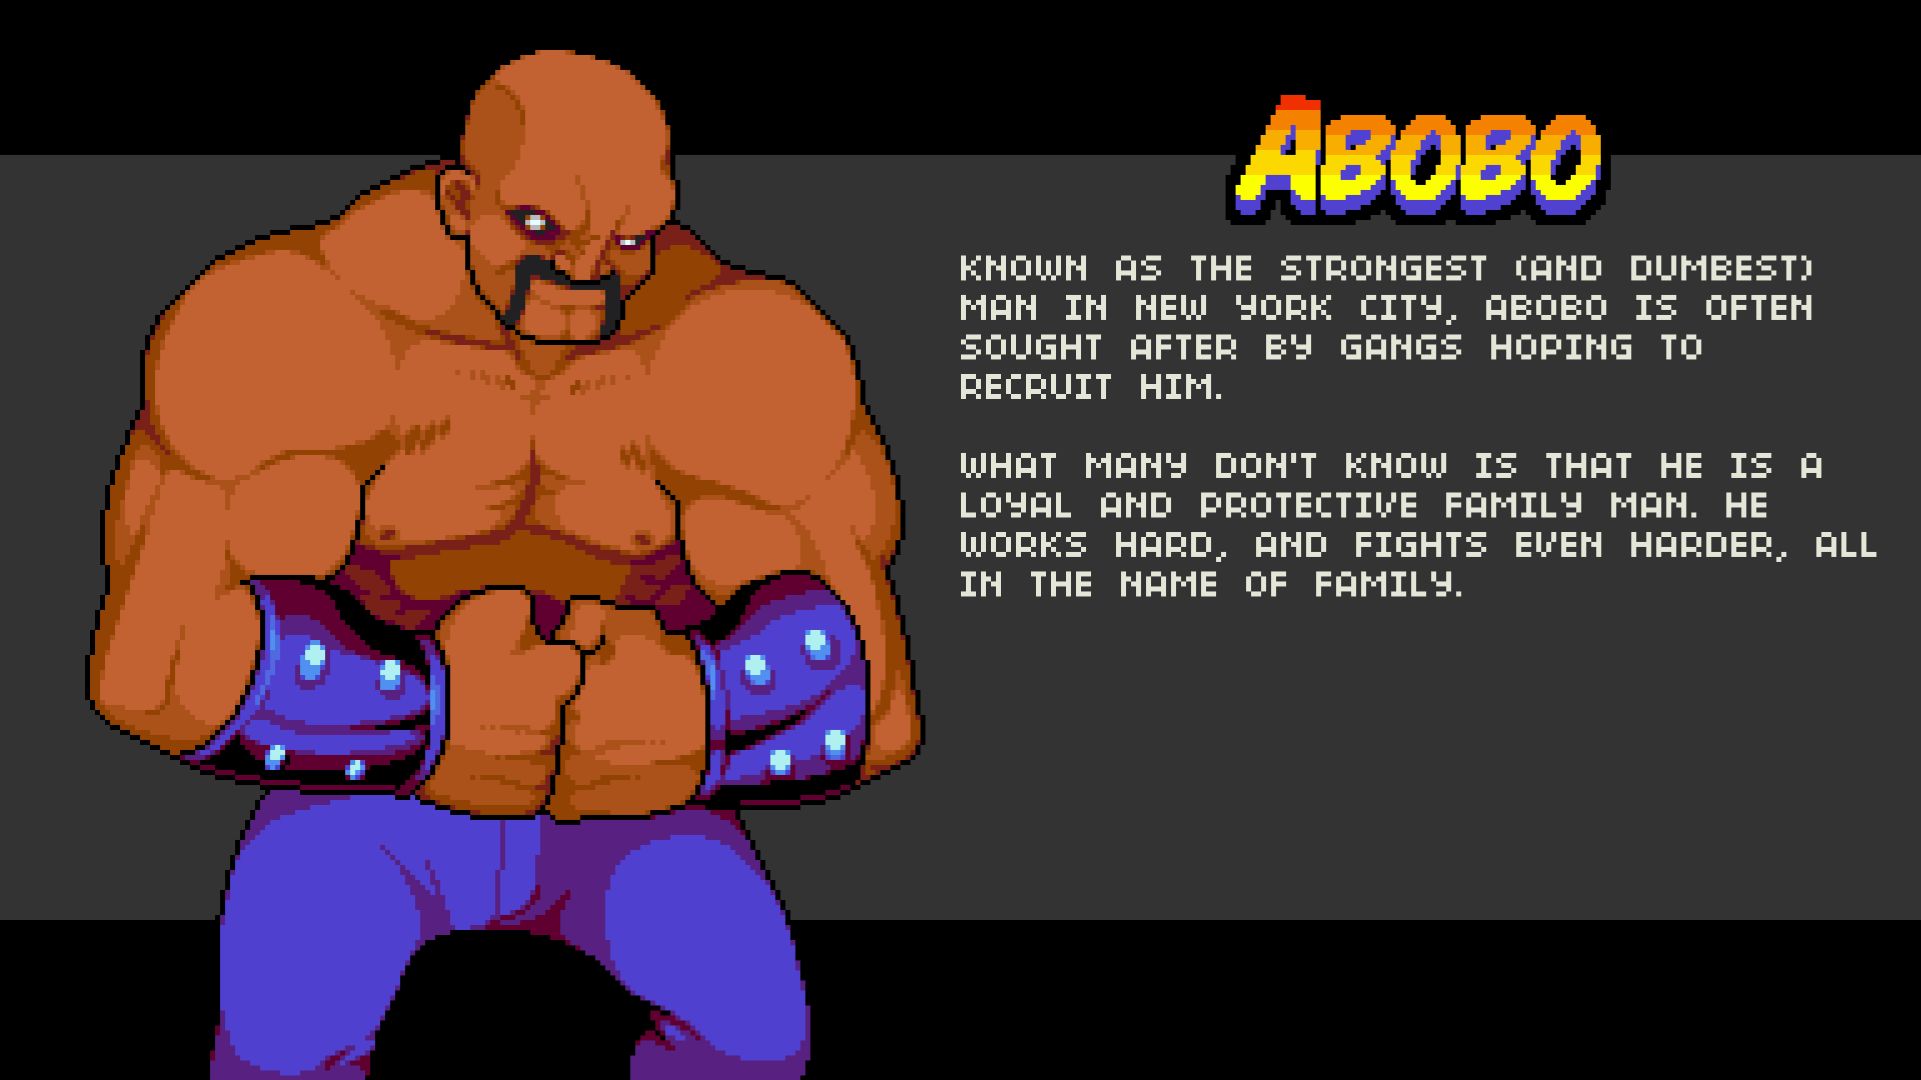 A Deeper Dive into Double Dragon Gaiden's 13 Playable Characters - Xbox Wire